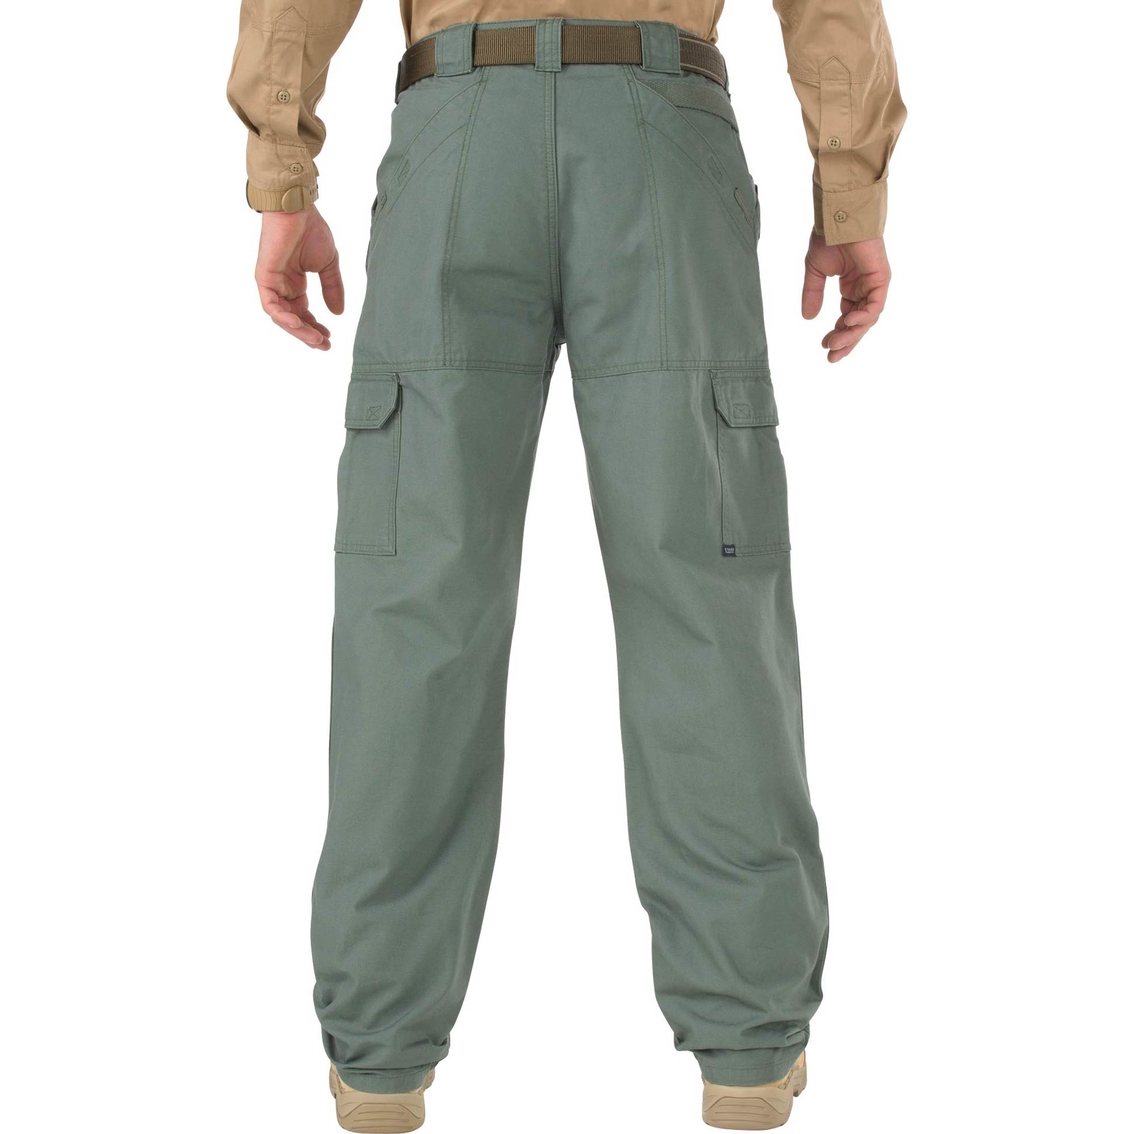 5.11 Tactical Vintage & Collectibles